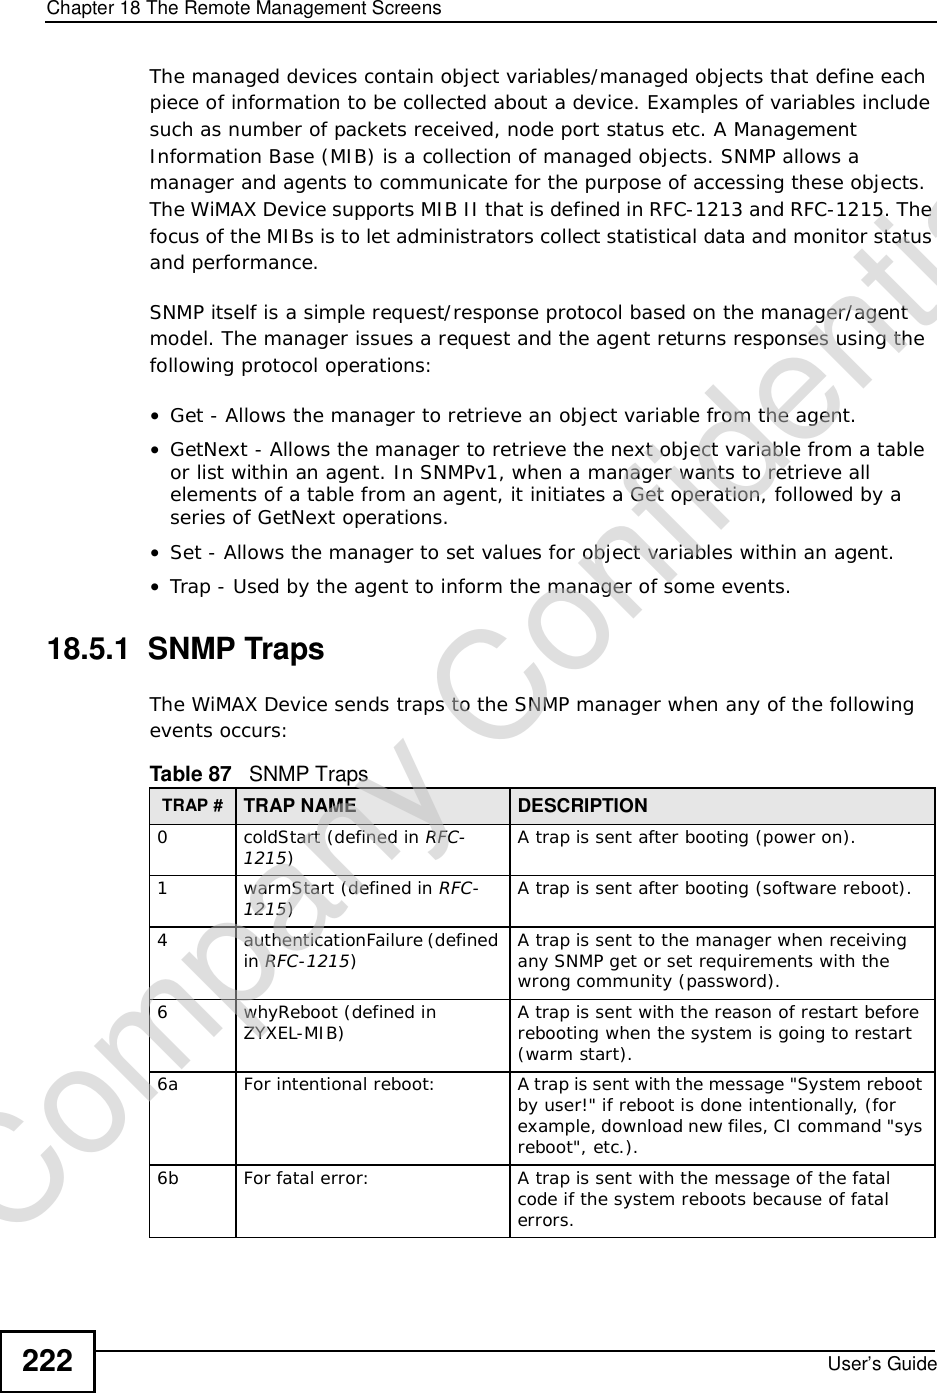 Chapter 18The Remote Management ScreensUser’s Guide222The managed devices contain object variables/managed objects that define each piece of information to be collected about a device. Examples of variables include such as number of packets received, node port status etc. A Management Information Base (MIB) is a collection of managed objects. SNMP allows a manager and agents to communicate for the purpose of accessing these objects. The WiMAX Device supports MIB II that is defined in RFC-1213 and RFC-1215. The focus of the MIBs is to let administrators collect statistical data and monitor status and performance.SNMP itself is a simple request/response protocol based on the manager/agent model. The manager issues a request and the agent returns responses using the following protocol operations: •Get - Allows the manager to retrieve an object variable from the agent. •GetNext - Allows the manager to retrieve the next object variable from a table or list within an agent. In SNMPv1, when a manager wants to retrieve all elements of a table from an agent, it initiates a Get operation, followed by a series of GetNext operations. •Set - Allows the manager to set values for object variables within an agent. •Trap - Used by the agent to inform the manager of some events.18.5.1  SNMP TrapsThe WiMAX Device sends traps to the SNMP manager when any of the following events occurs:          Table 87   SNMP TrapsTRAP # TRAP NAME DESCRIPTION0coldStart (defined in RFC-1215)A trap is sent after booting (power on).1warmStart (defined in RFC-1215)A trap is sent after booting (software reboot).4 authenticationFailure (defined in RFC-1215)A trap is sent to the manager when receiving any SNMP get or set requirements with the wrong community (password).6whyReboot (defined in ZYXEL-MIB) A trap is sent with the reason of restart before rebooting when the system is going to restart (warm start).6a For intentional reboot: A trap is sent with the message &quot;System reboot by user!&quot; if reboot is done intentionally, (for example, download new files, CI command &quot;sys reboot&quot;, etc.).6b For fatal error:  A trap is sent with the message of the fatal code if the system reboots because of fatal errors.Company Confidential